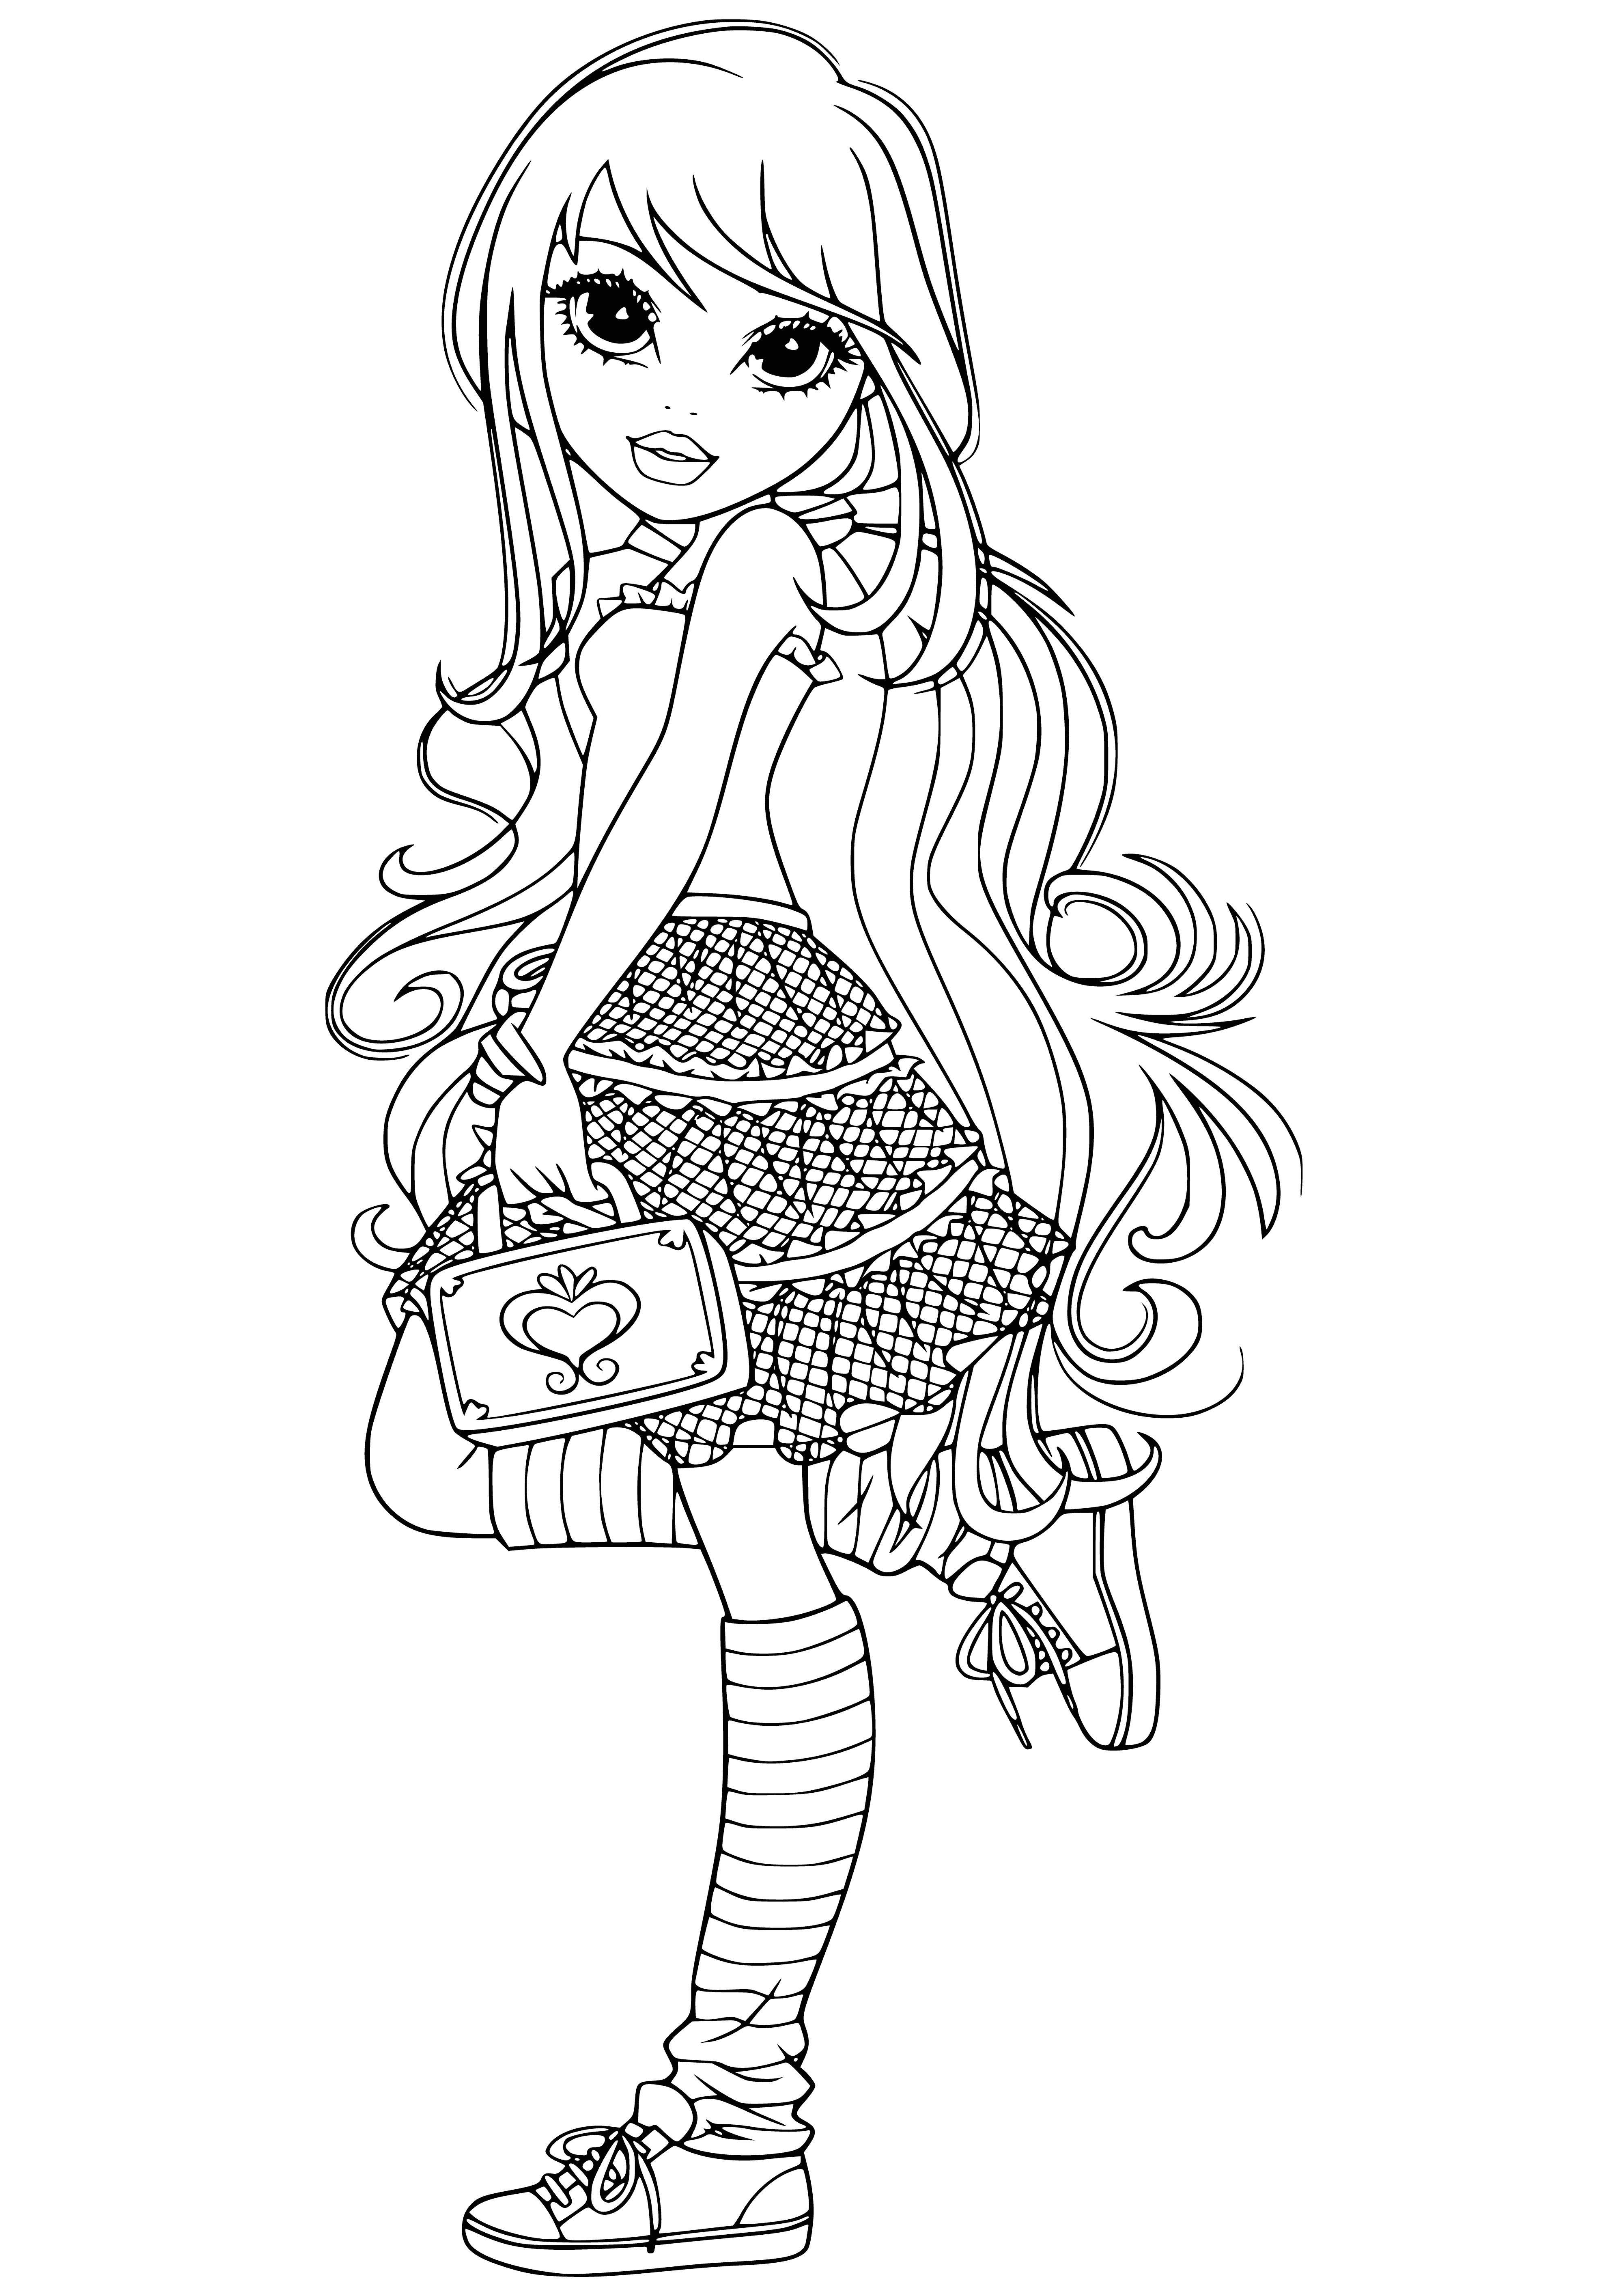 coloring page: Lexa is a serious Moxie Girl in a BW coloring page. She has long, curly hair, a sleeveless top, tight pants & arms crossed, looking determined.